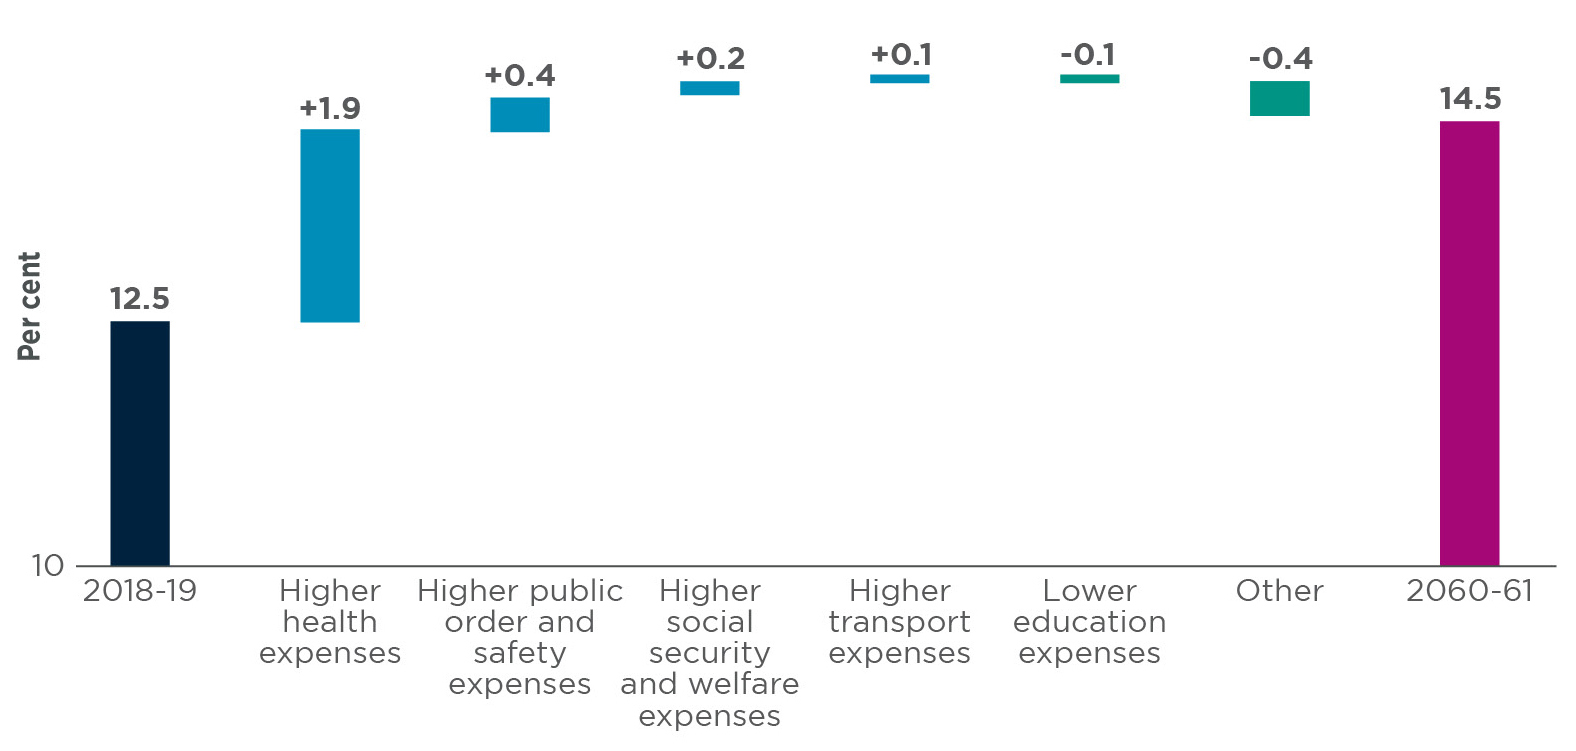 A waterfall chart showing the following recurrent expenses along the x axis; 2018-19 12.5, Higher health expenses +1.9, Higher public order and safety expenses +0.4, Higher social security and welfare expenses +0.2, Higher transport expenses +0.1, Lower education expenses -0.1, Other -0.4, 2060-61 14.5.